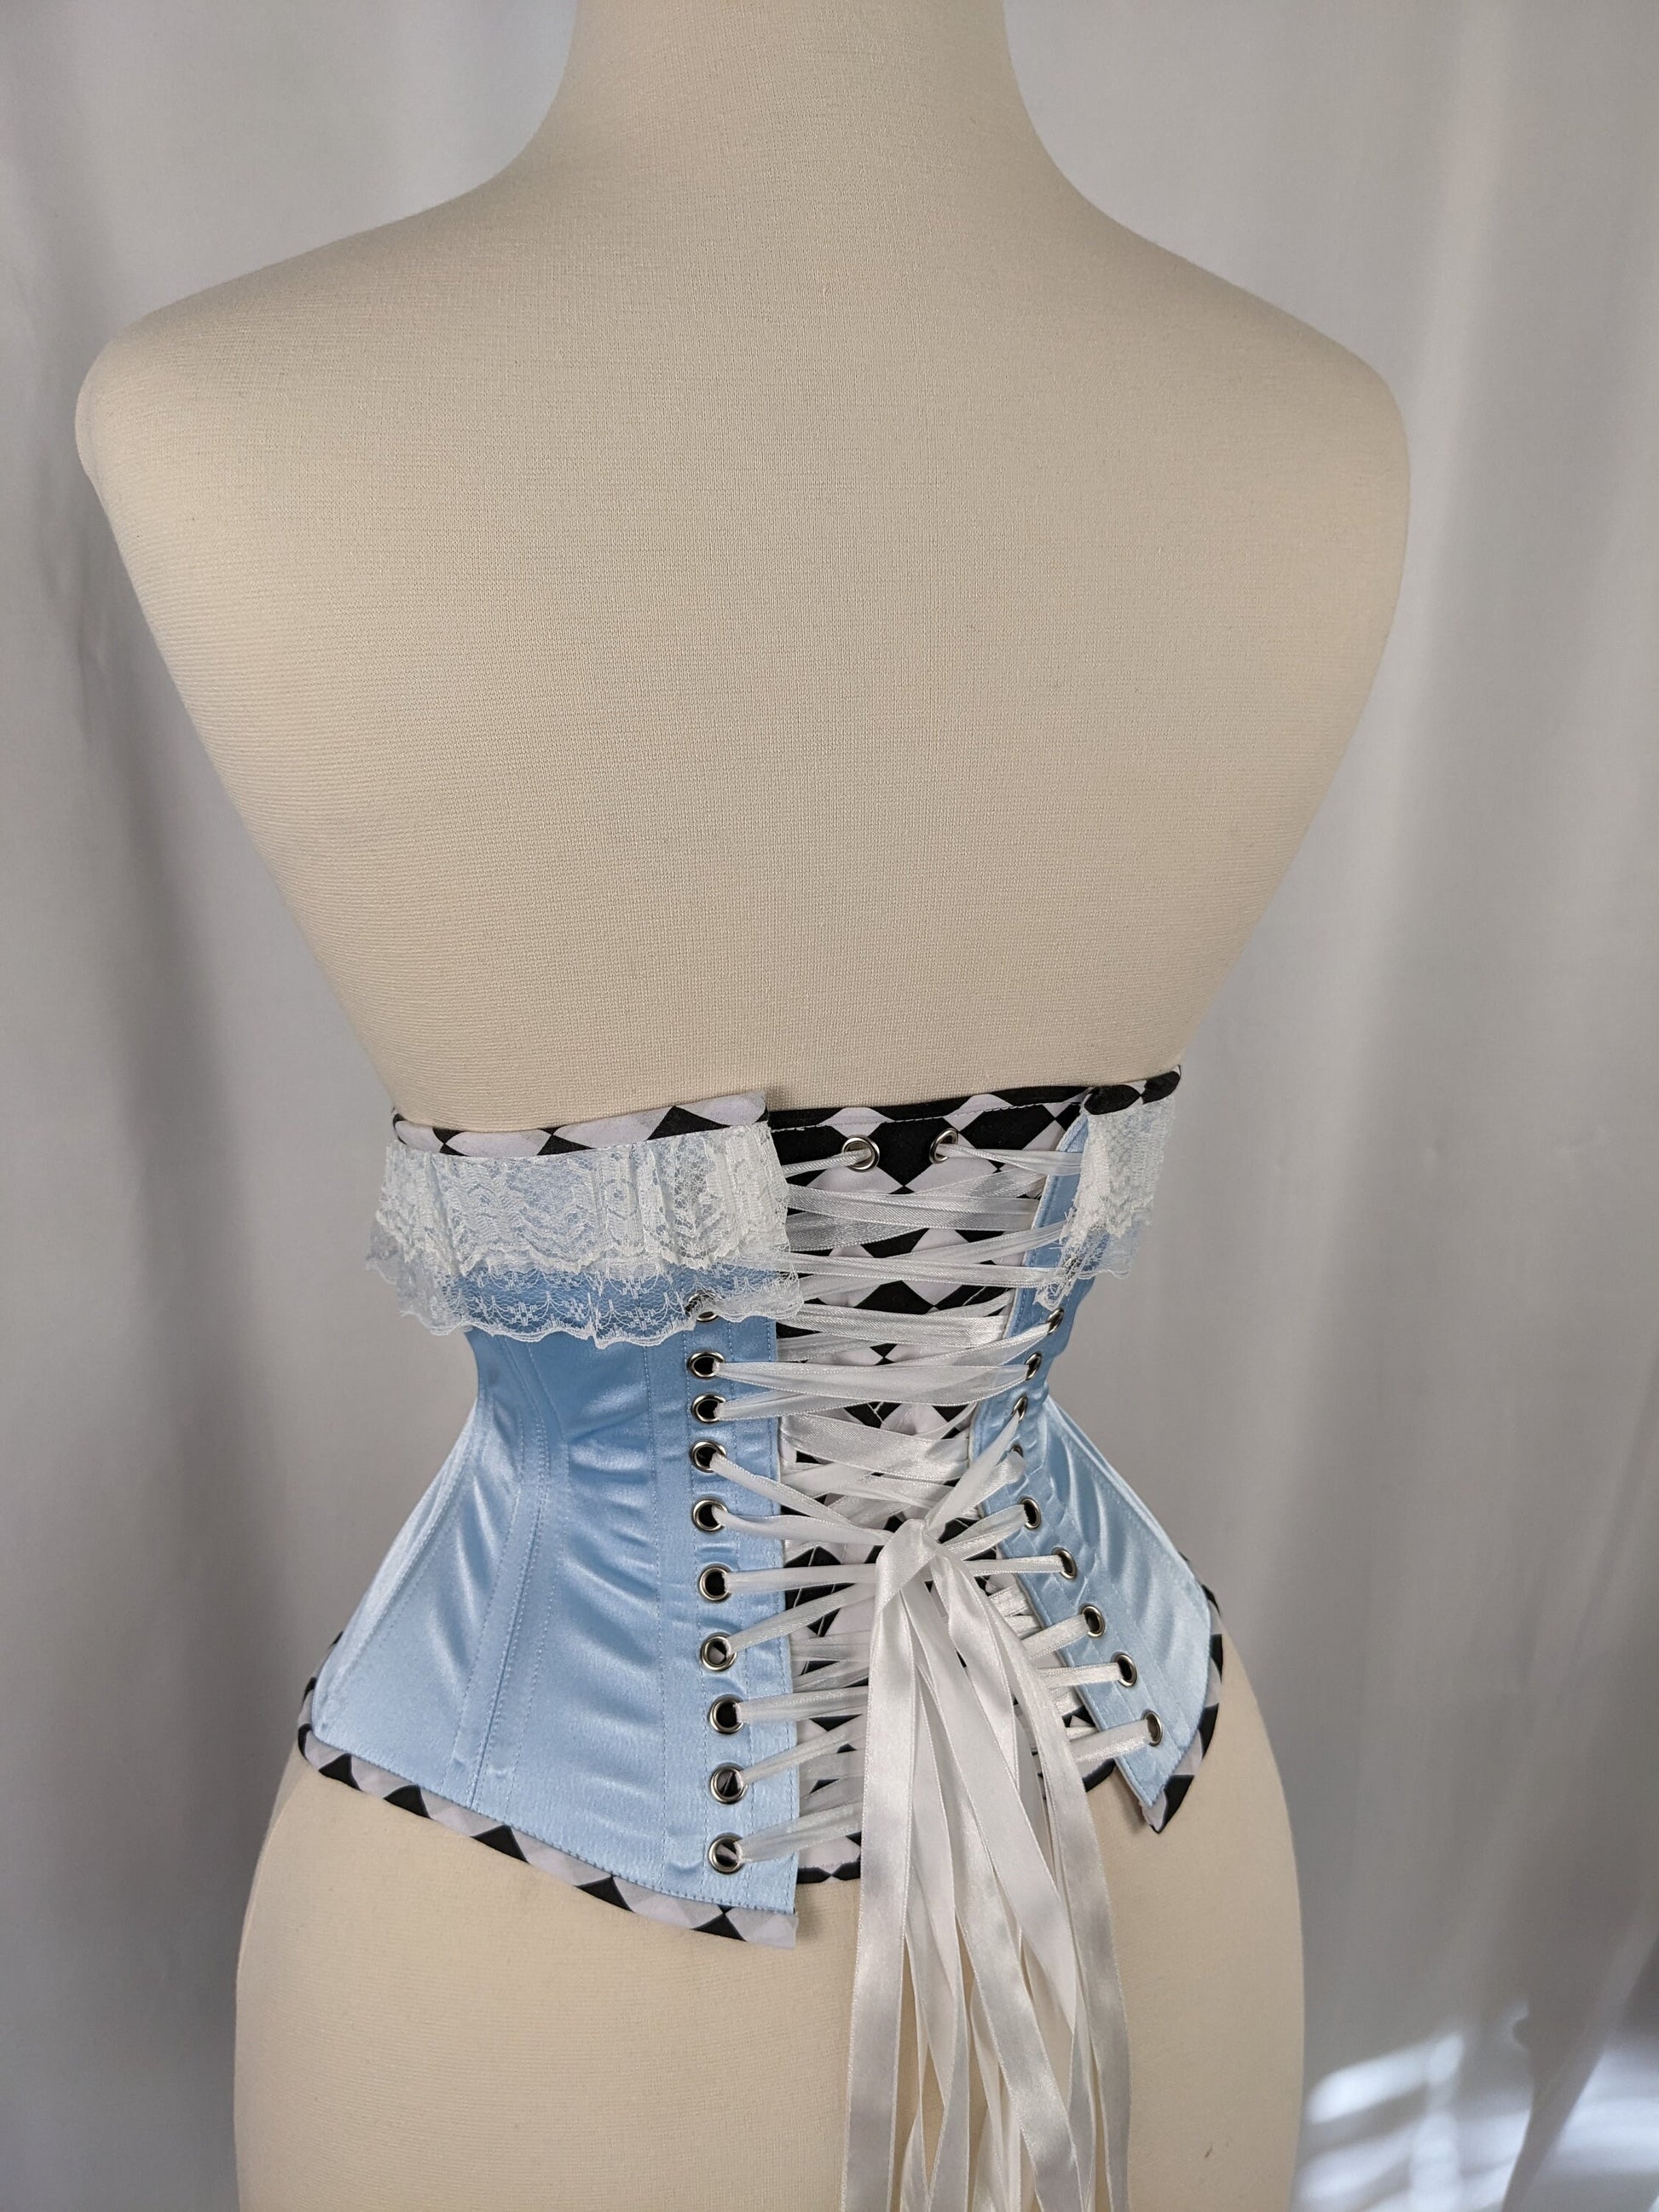 Can the Drácula clothing strapless corset give me the same waist